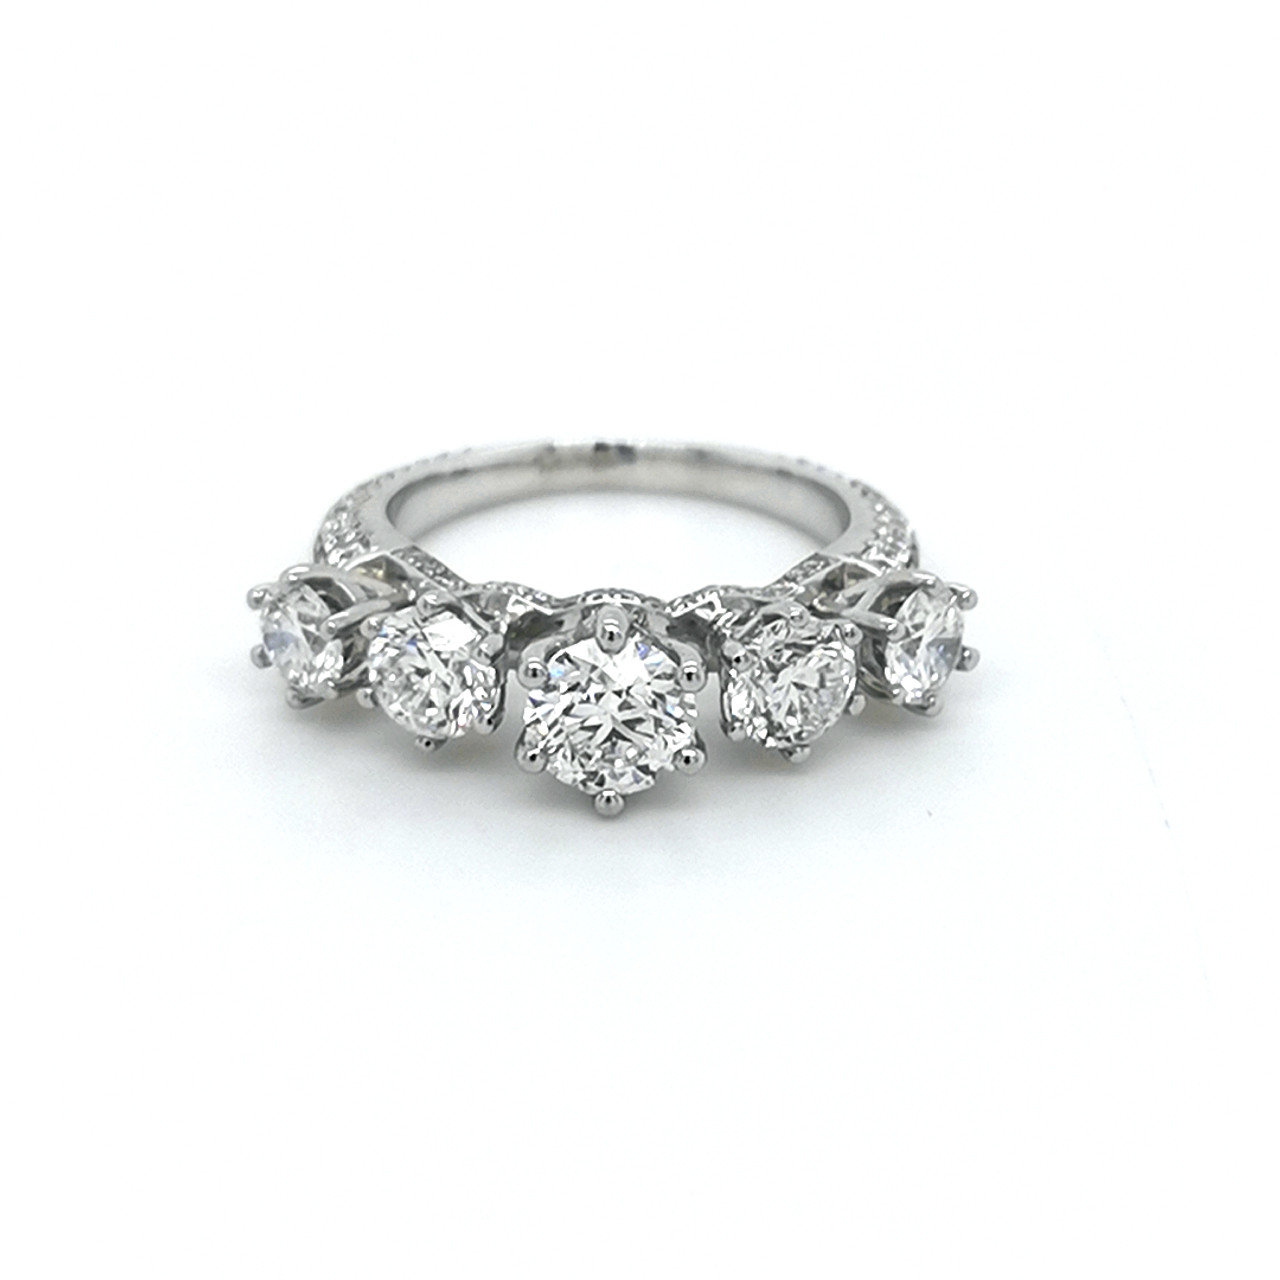 Higher or lower set solitaire? : r/EngagementRings